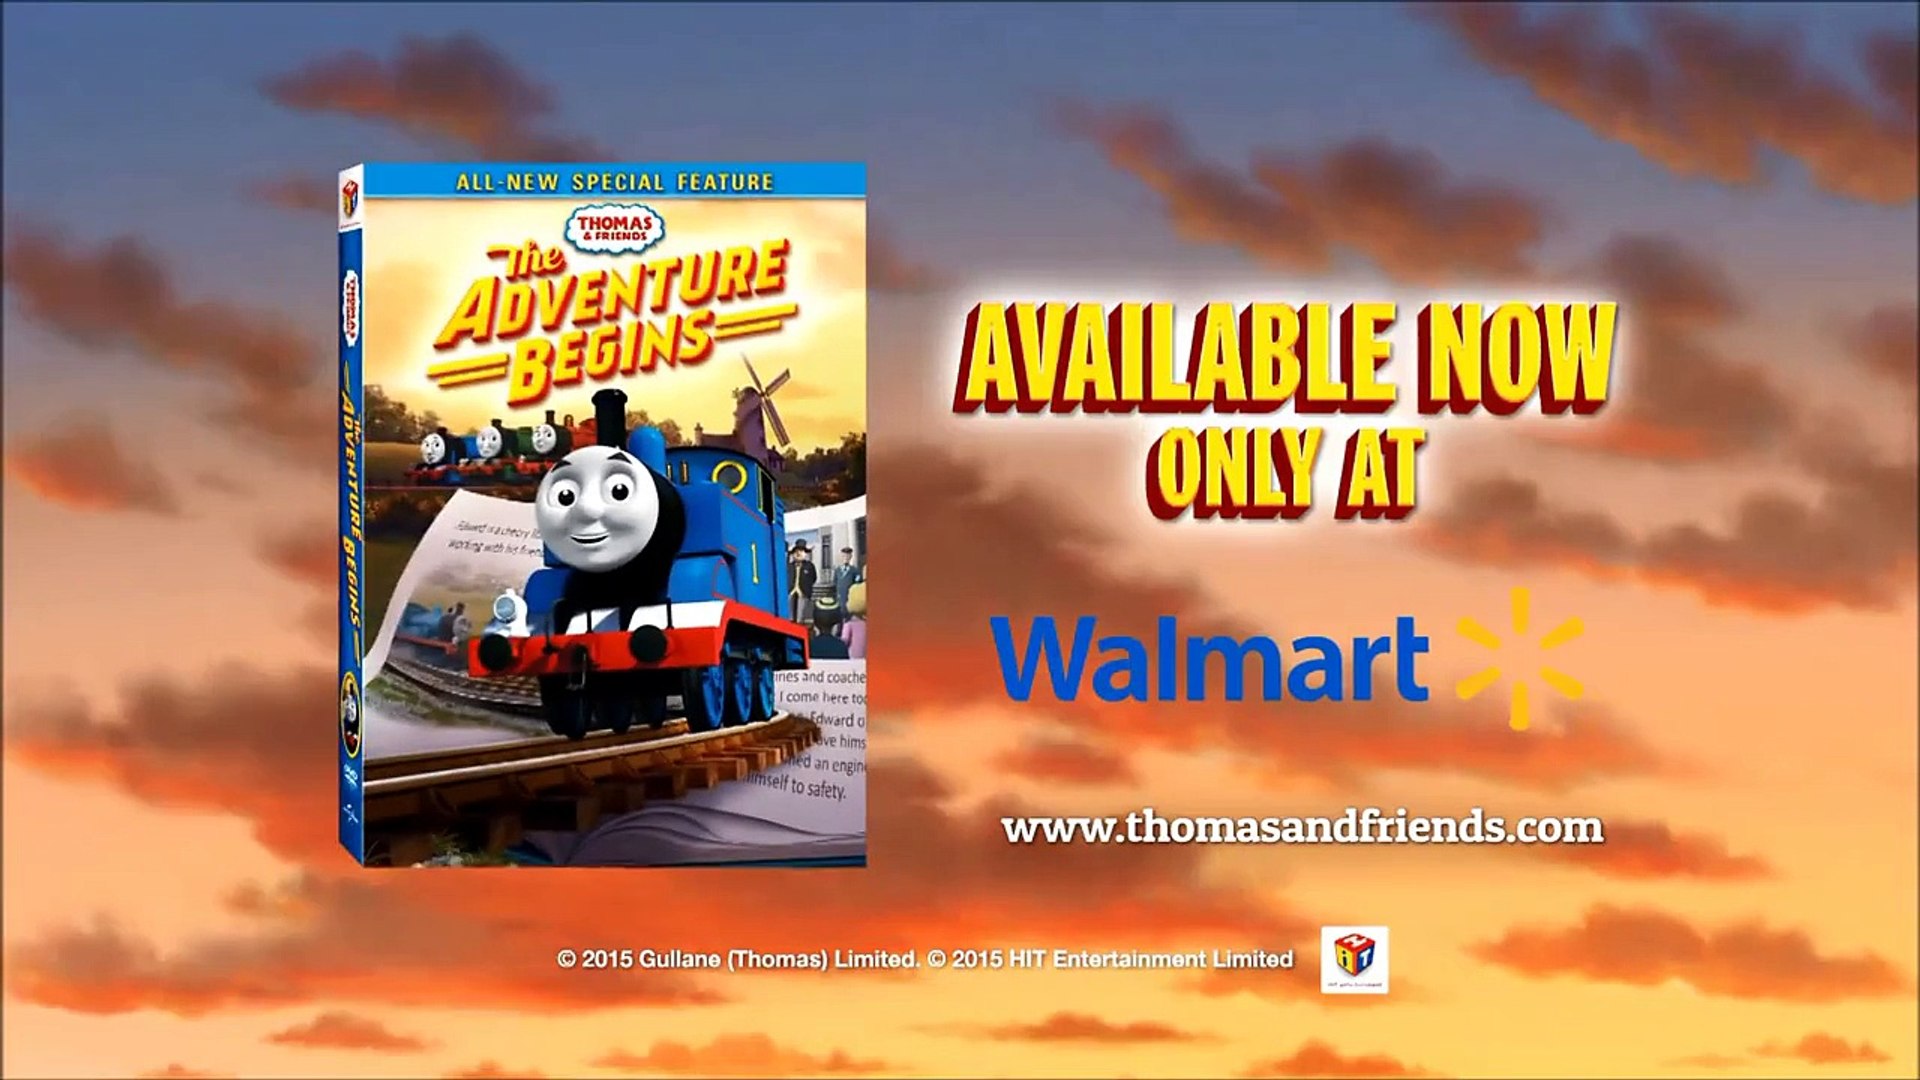 The Adventure Begins Available Now!  Thomas & Friends - Dailymotion Video